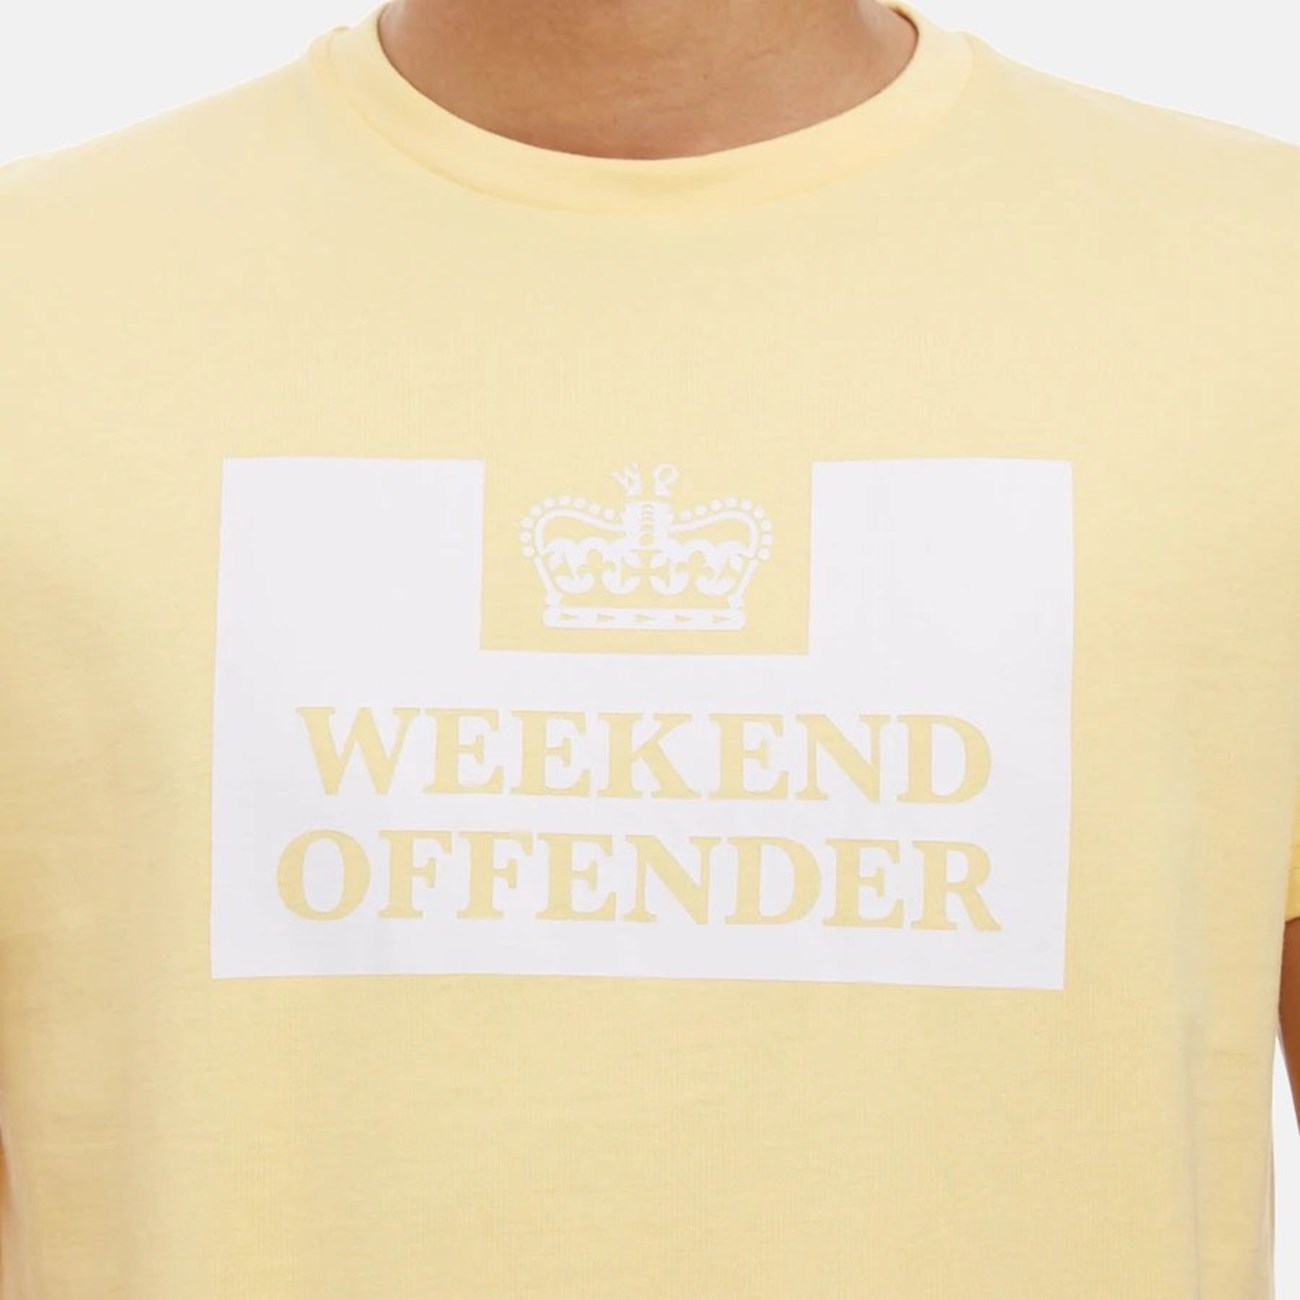 WEEKEND OFFENDER Ανδρικό T-shirt Prison TSSS22 12-0022 - The Athlete's Foot